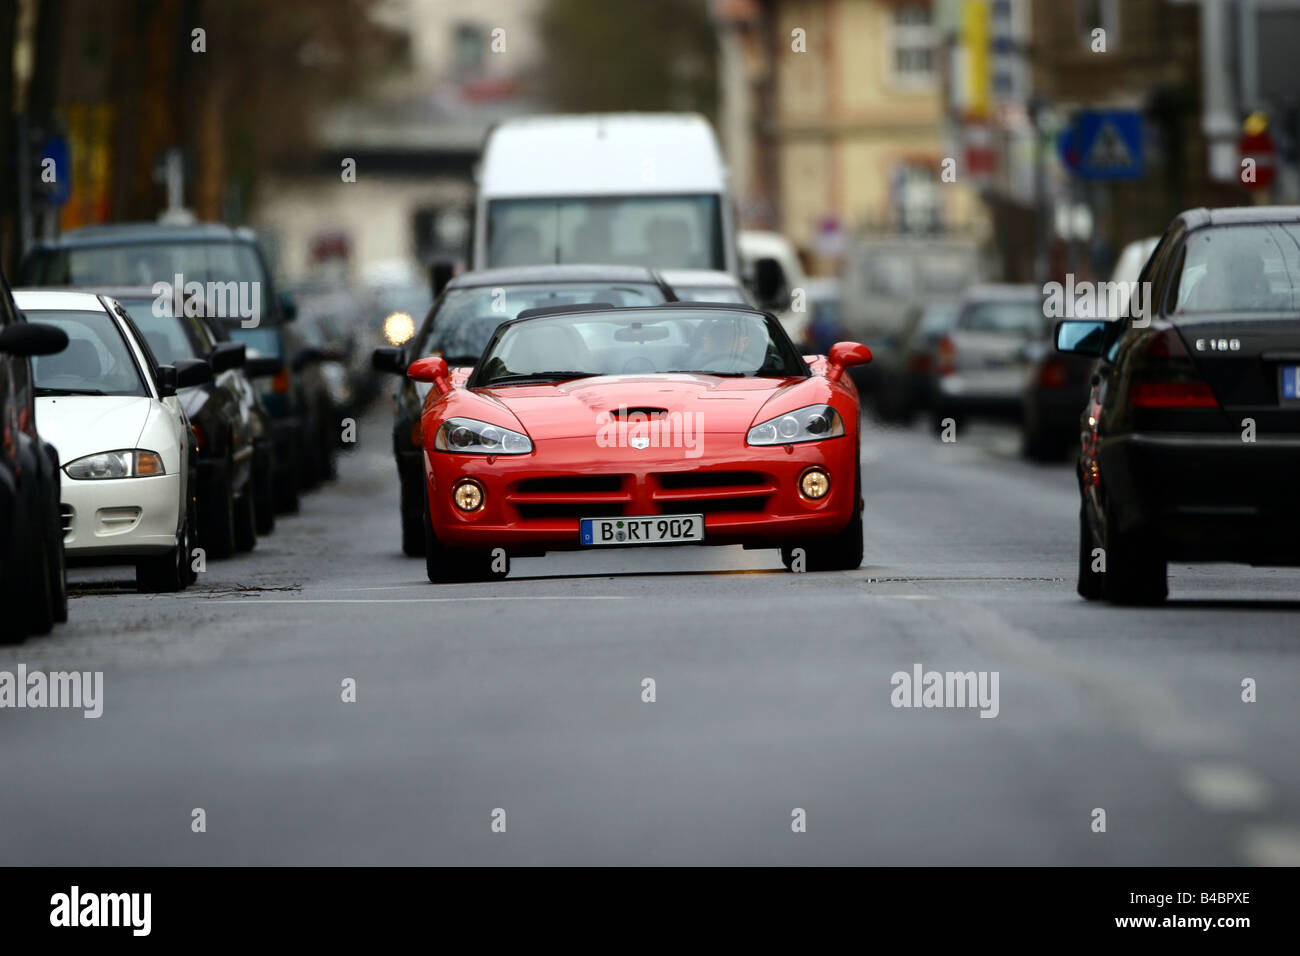 Car, Dodge Viper SRT-10, Convertible, model year 2003-, red, FGHDS, open top, driving, frontal view, City Stock Photo